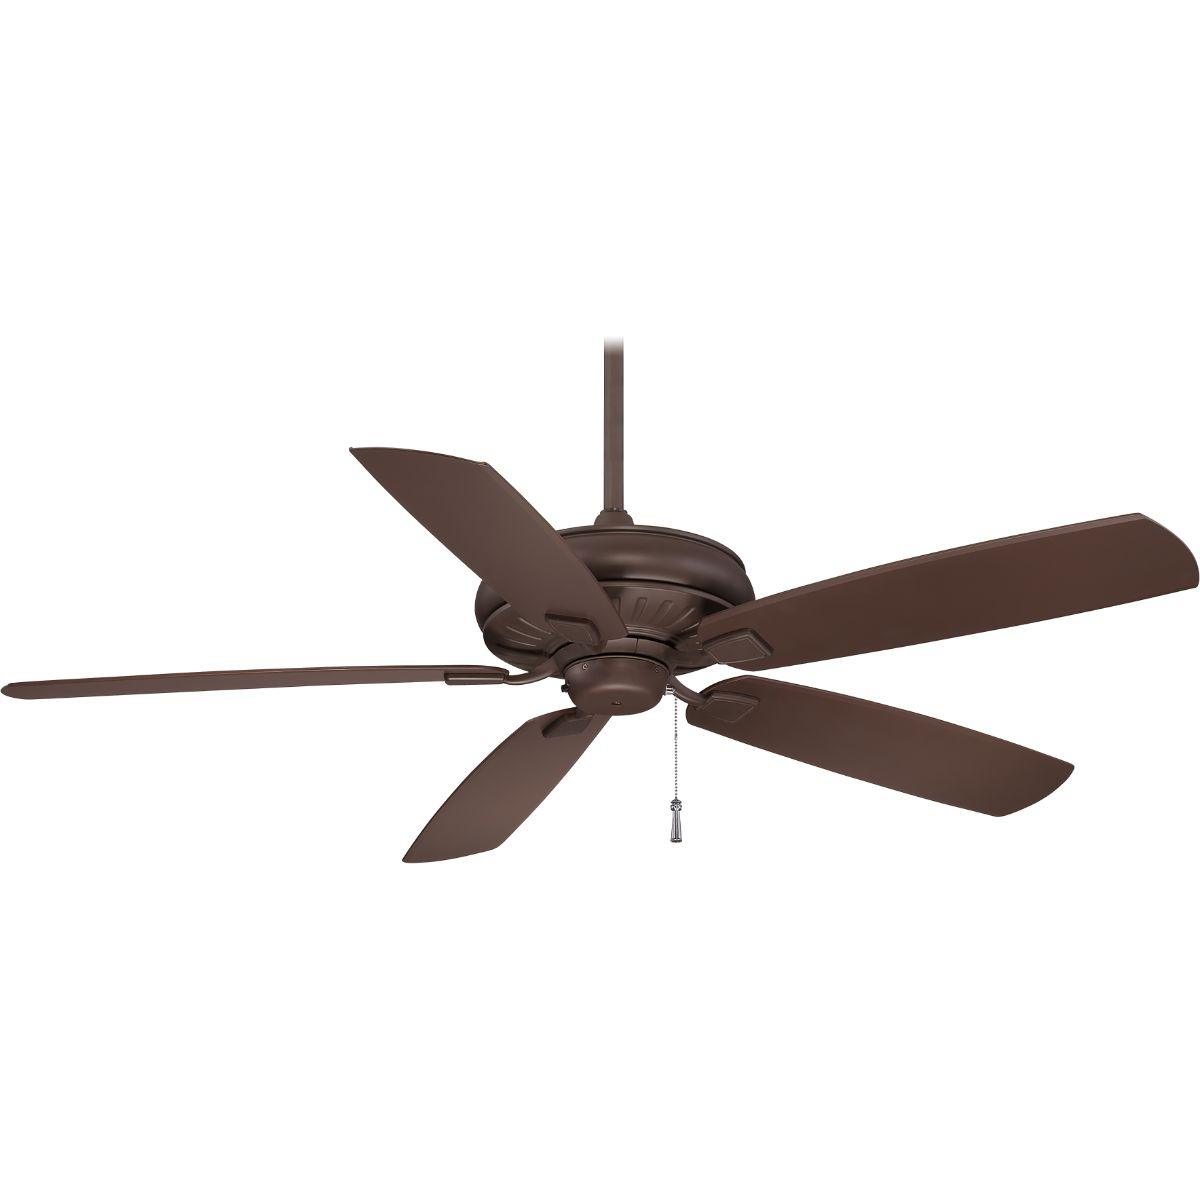 Sunseeker 60 Inch Outdoor Ceiling Fan With Pull Chain - Bees Lighting